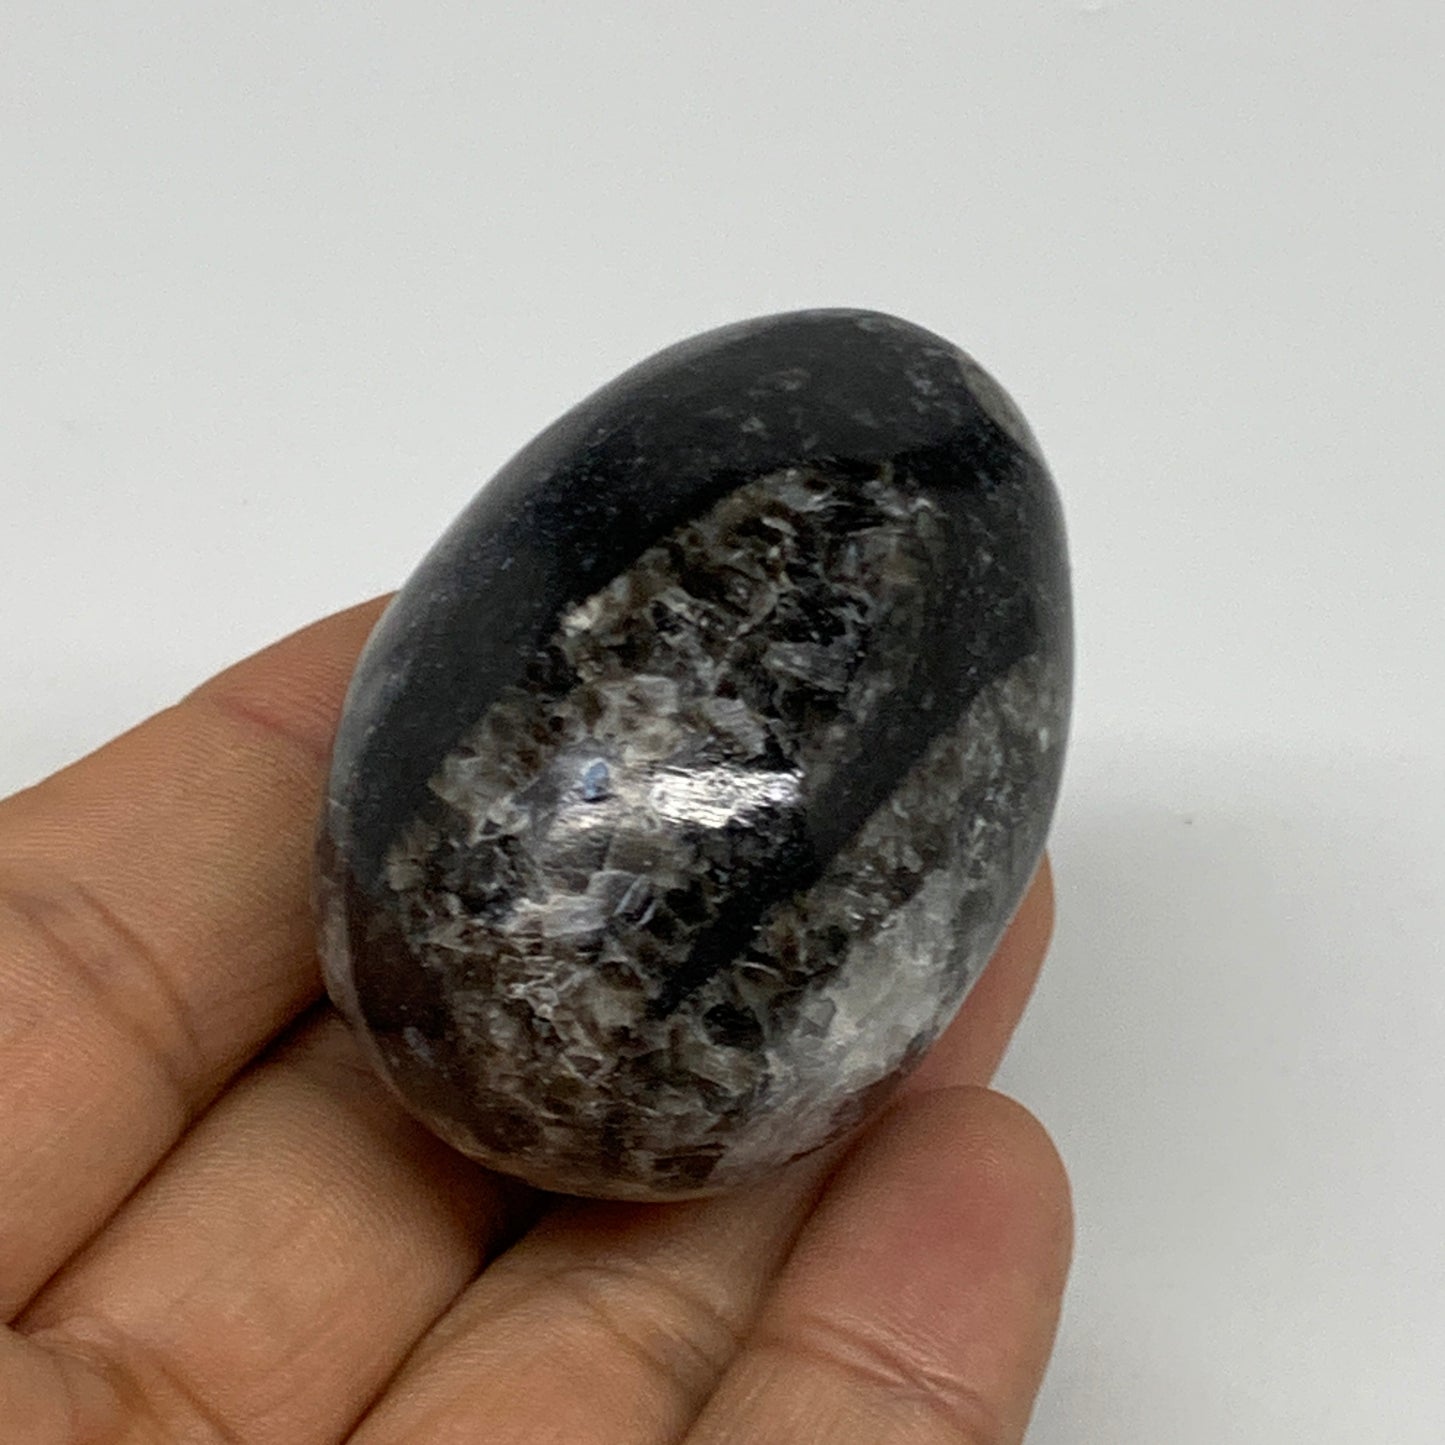 90.9g, 2"x1.3", Natural Fossil Orthoceras Stone Egg from Morocco, B31062